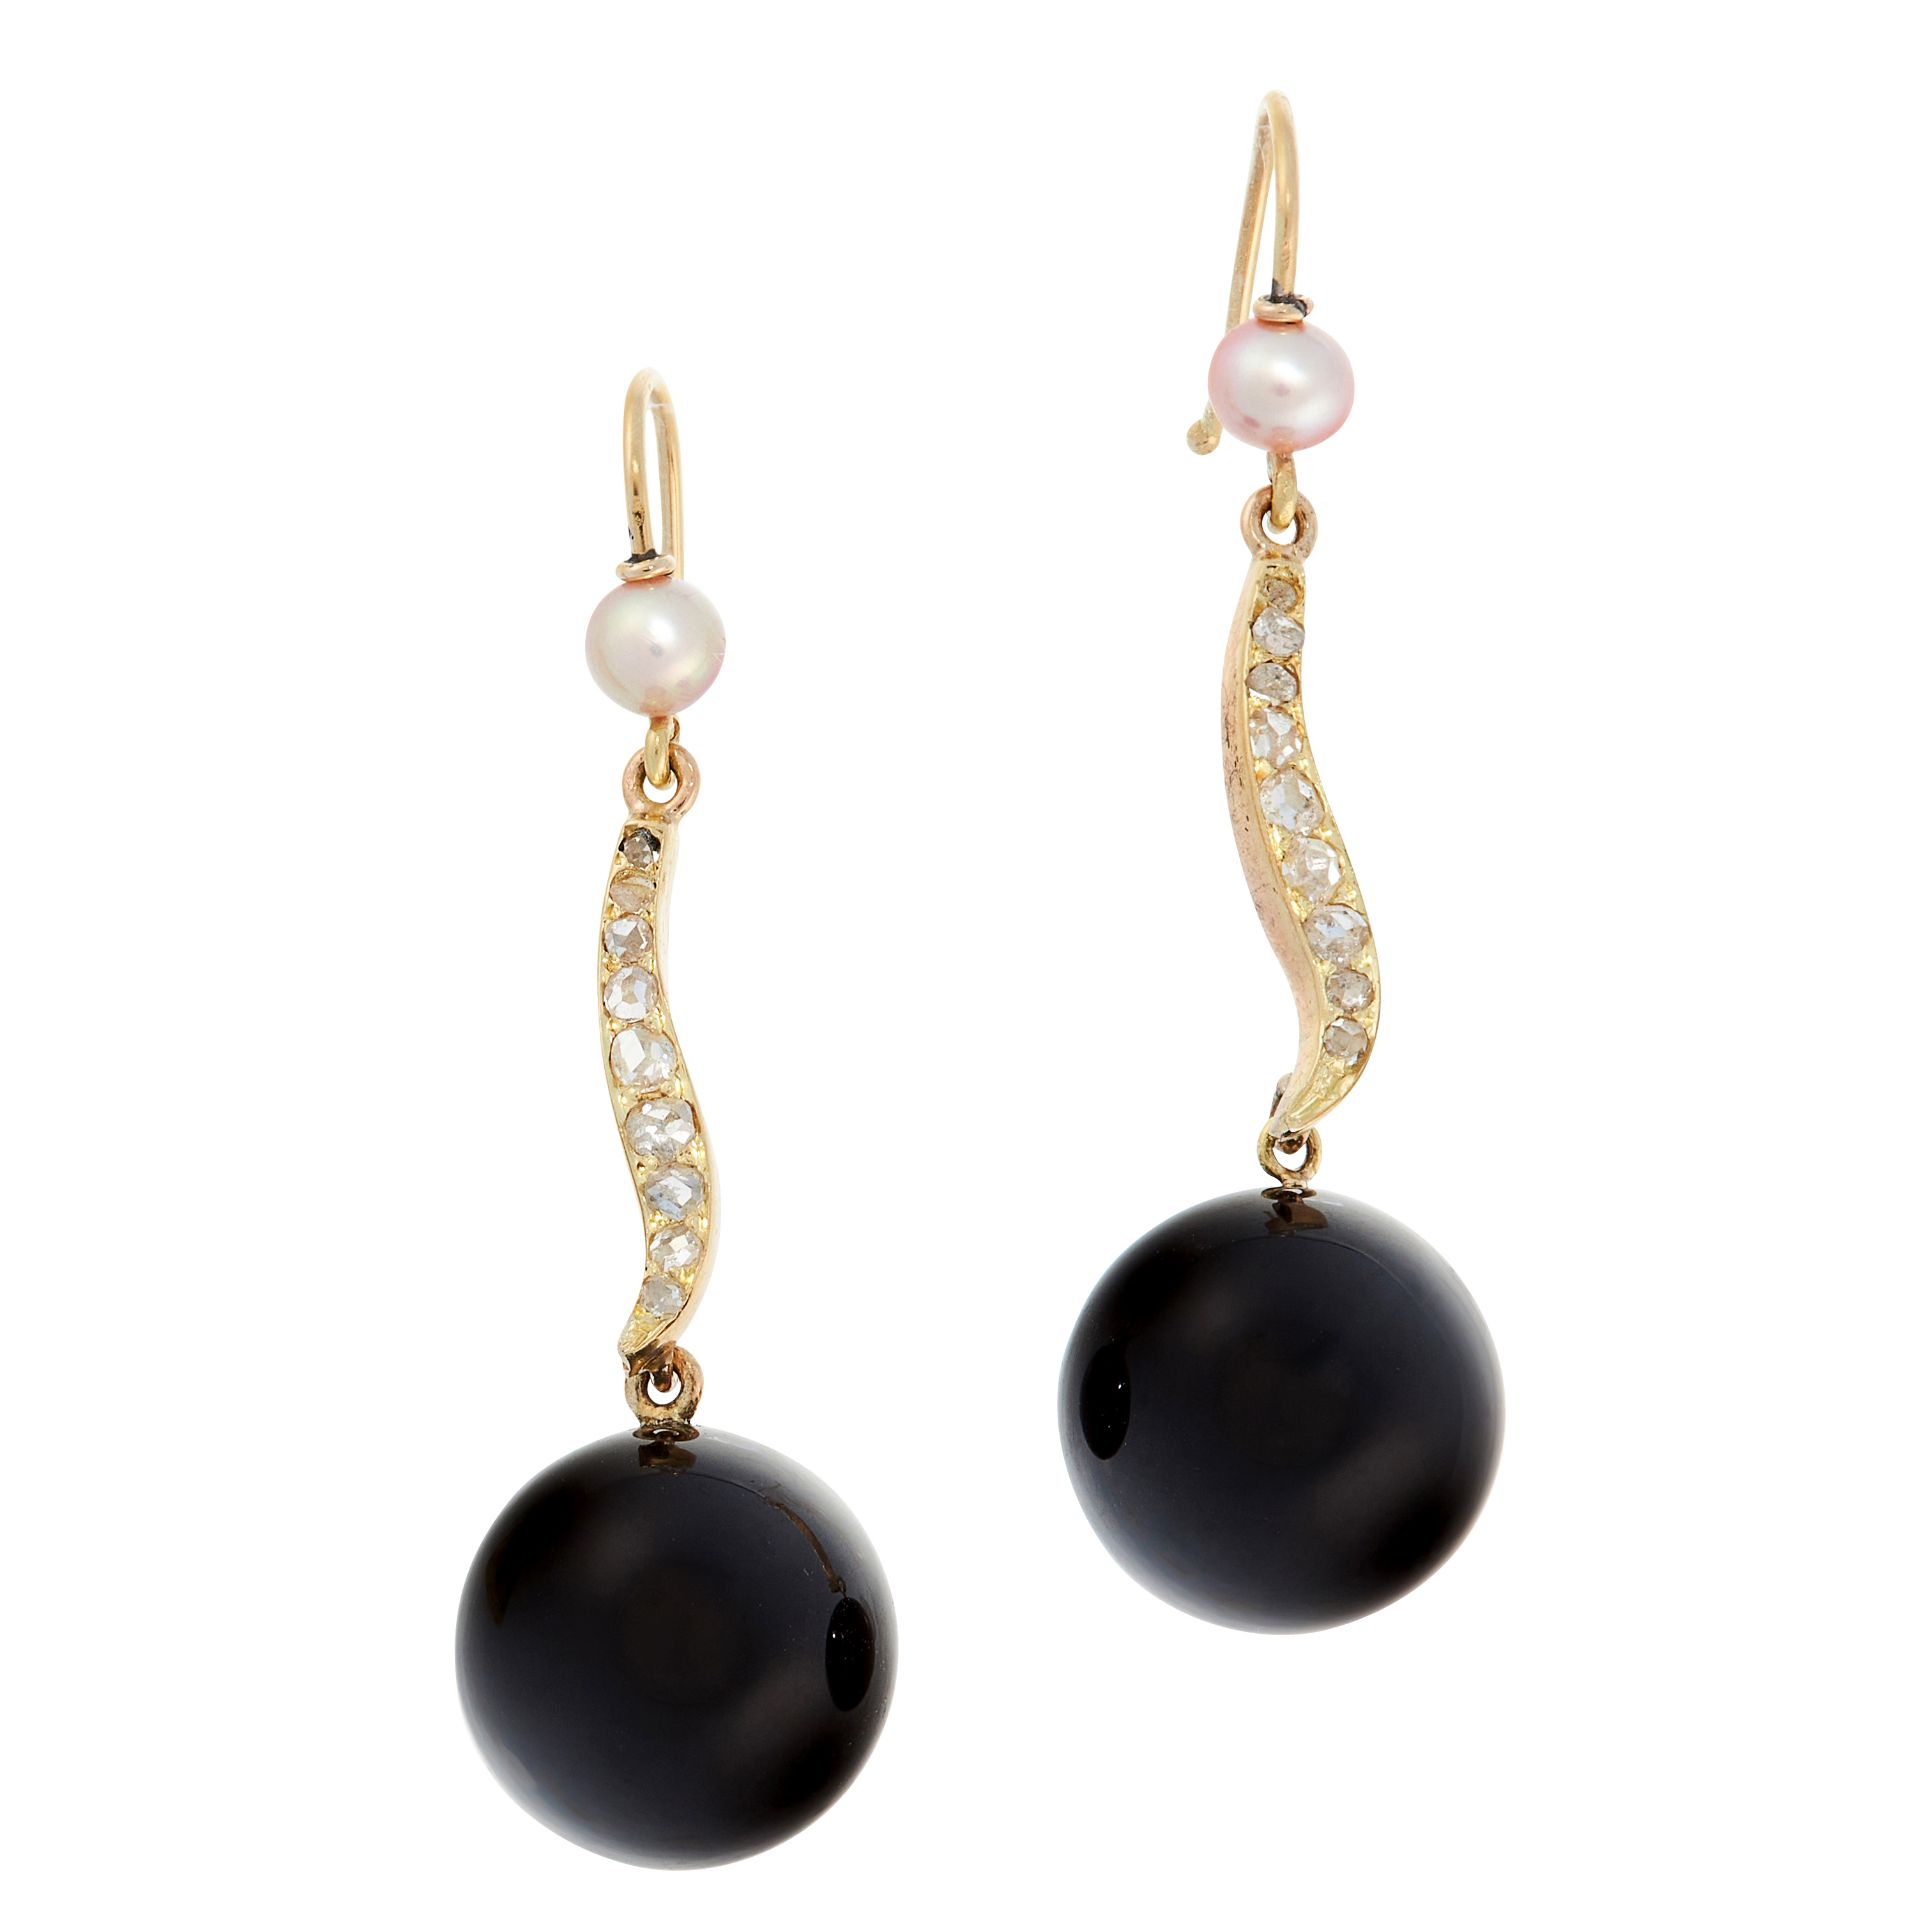 A PAIR OF PEARL, DIAMOND AND ONYX DROP EARRINGS comprising of a pearl above a swirl motif set with